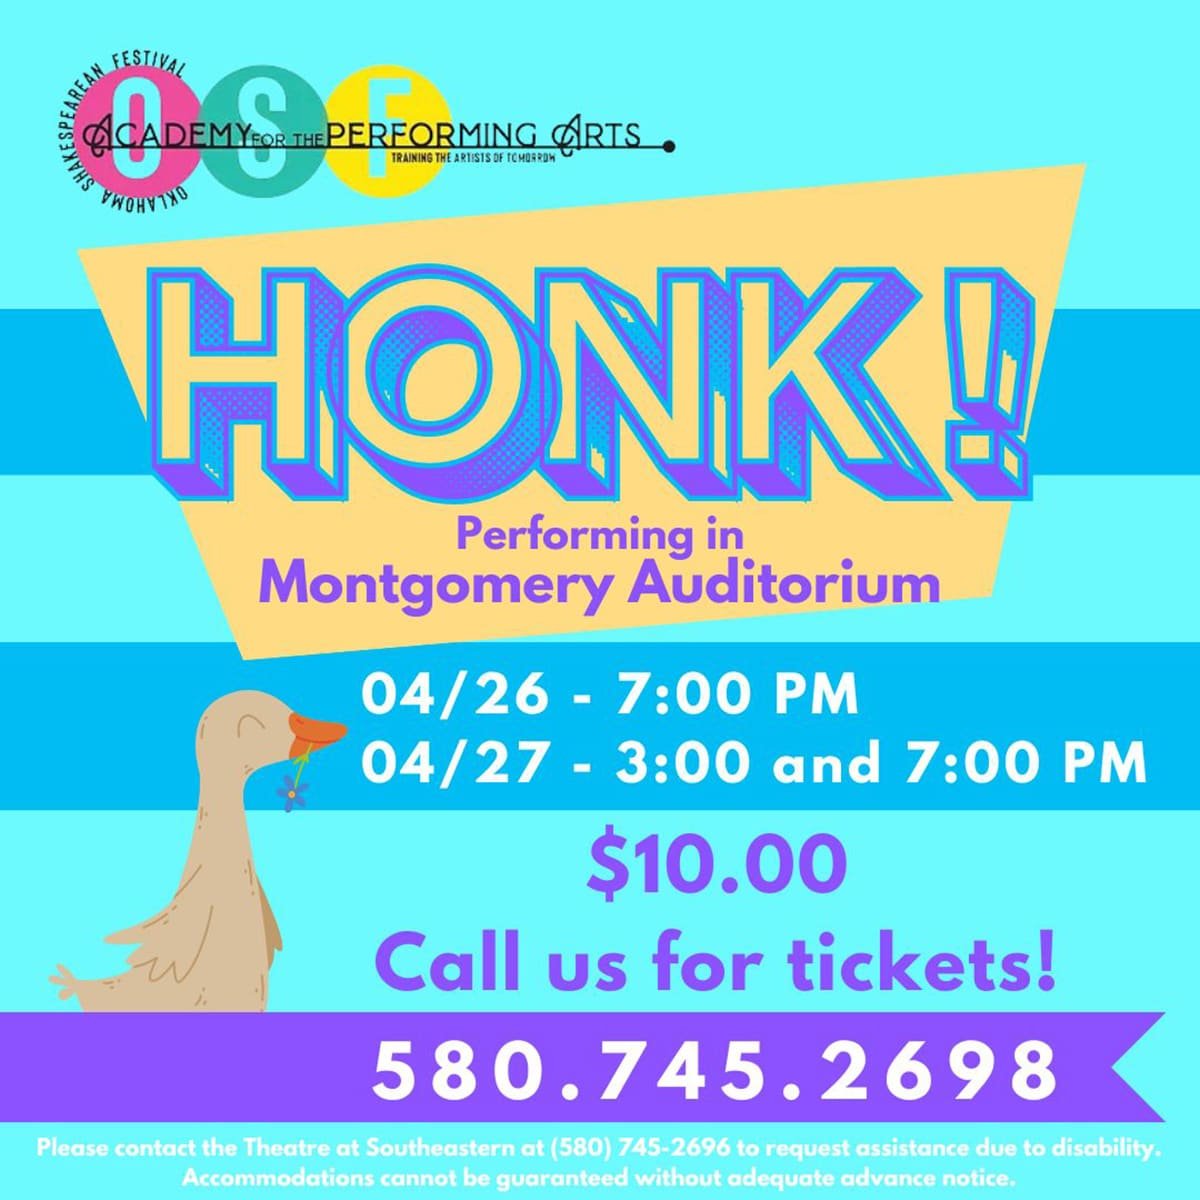 Oklahoma Shakespearean Festival’s Academy for the Performing Arts: “Honk!” banner